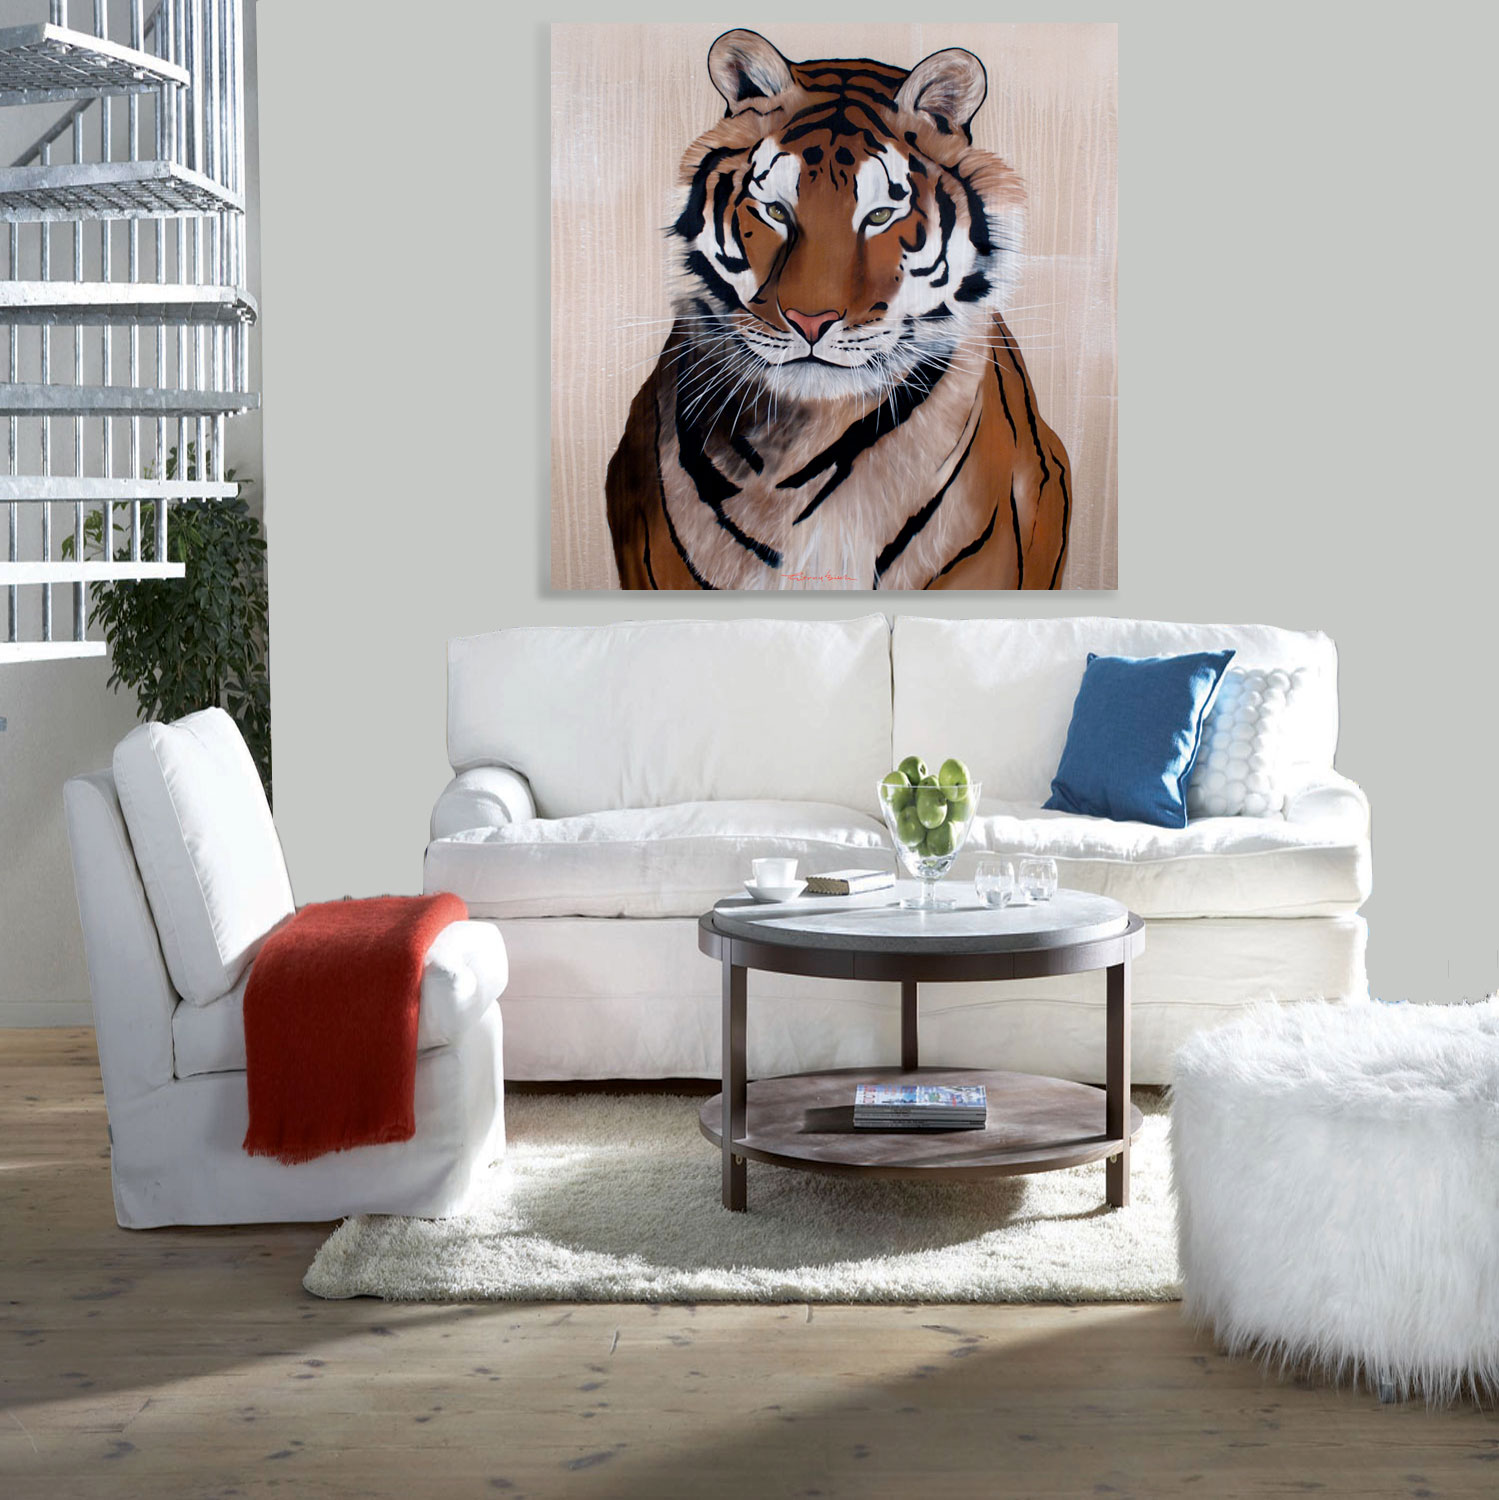 ROYAL-TIGER tiger Thierry Bisch Contemporary painter animals painting art  nature biodiversity conservation 